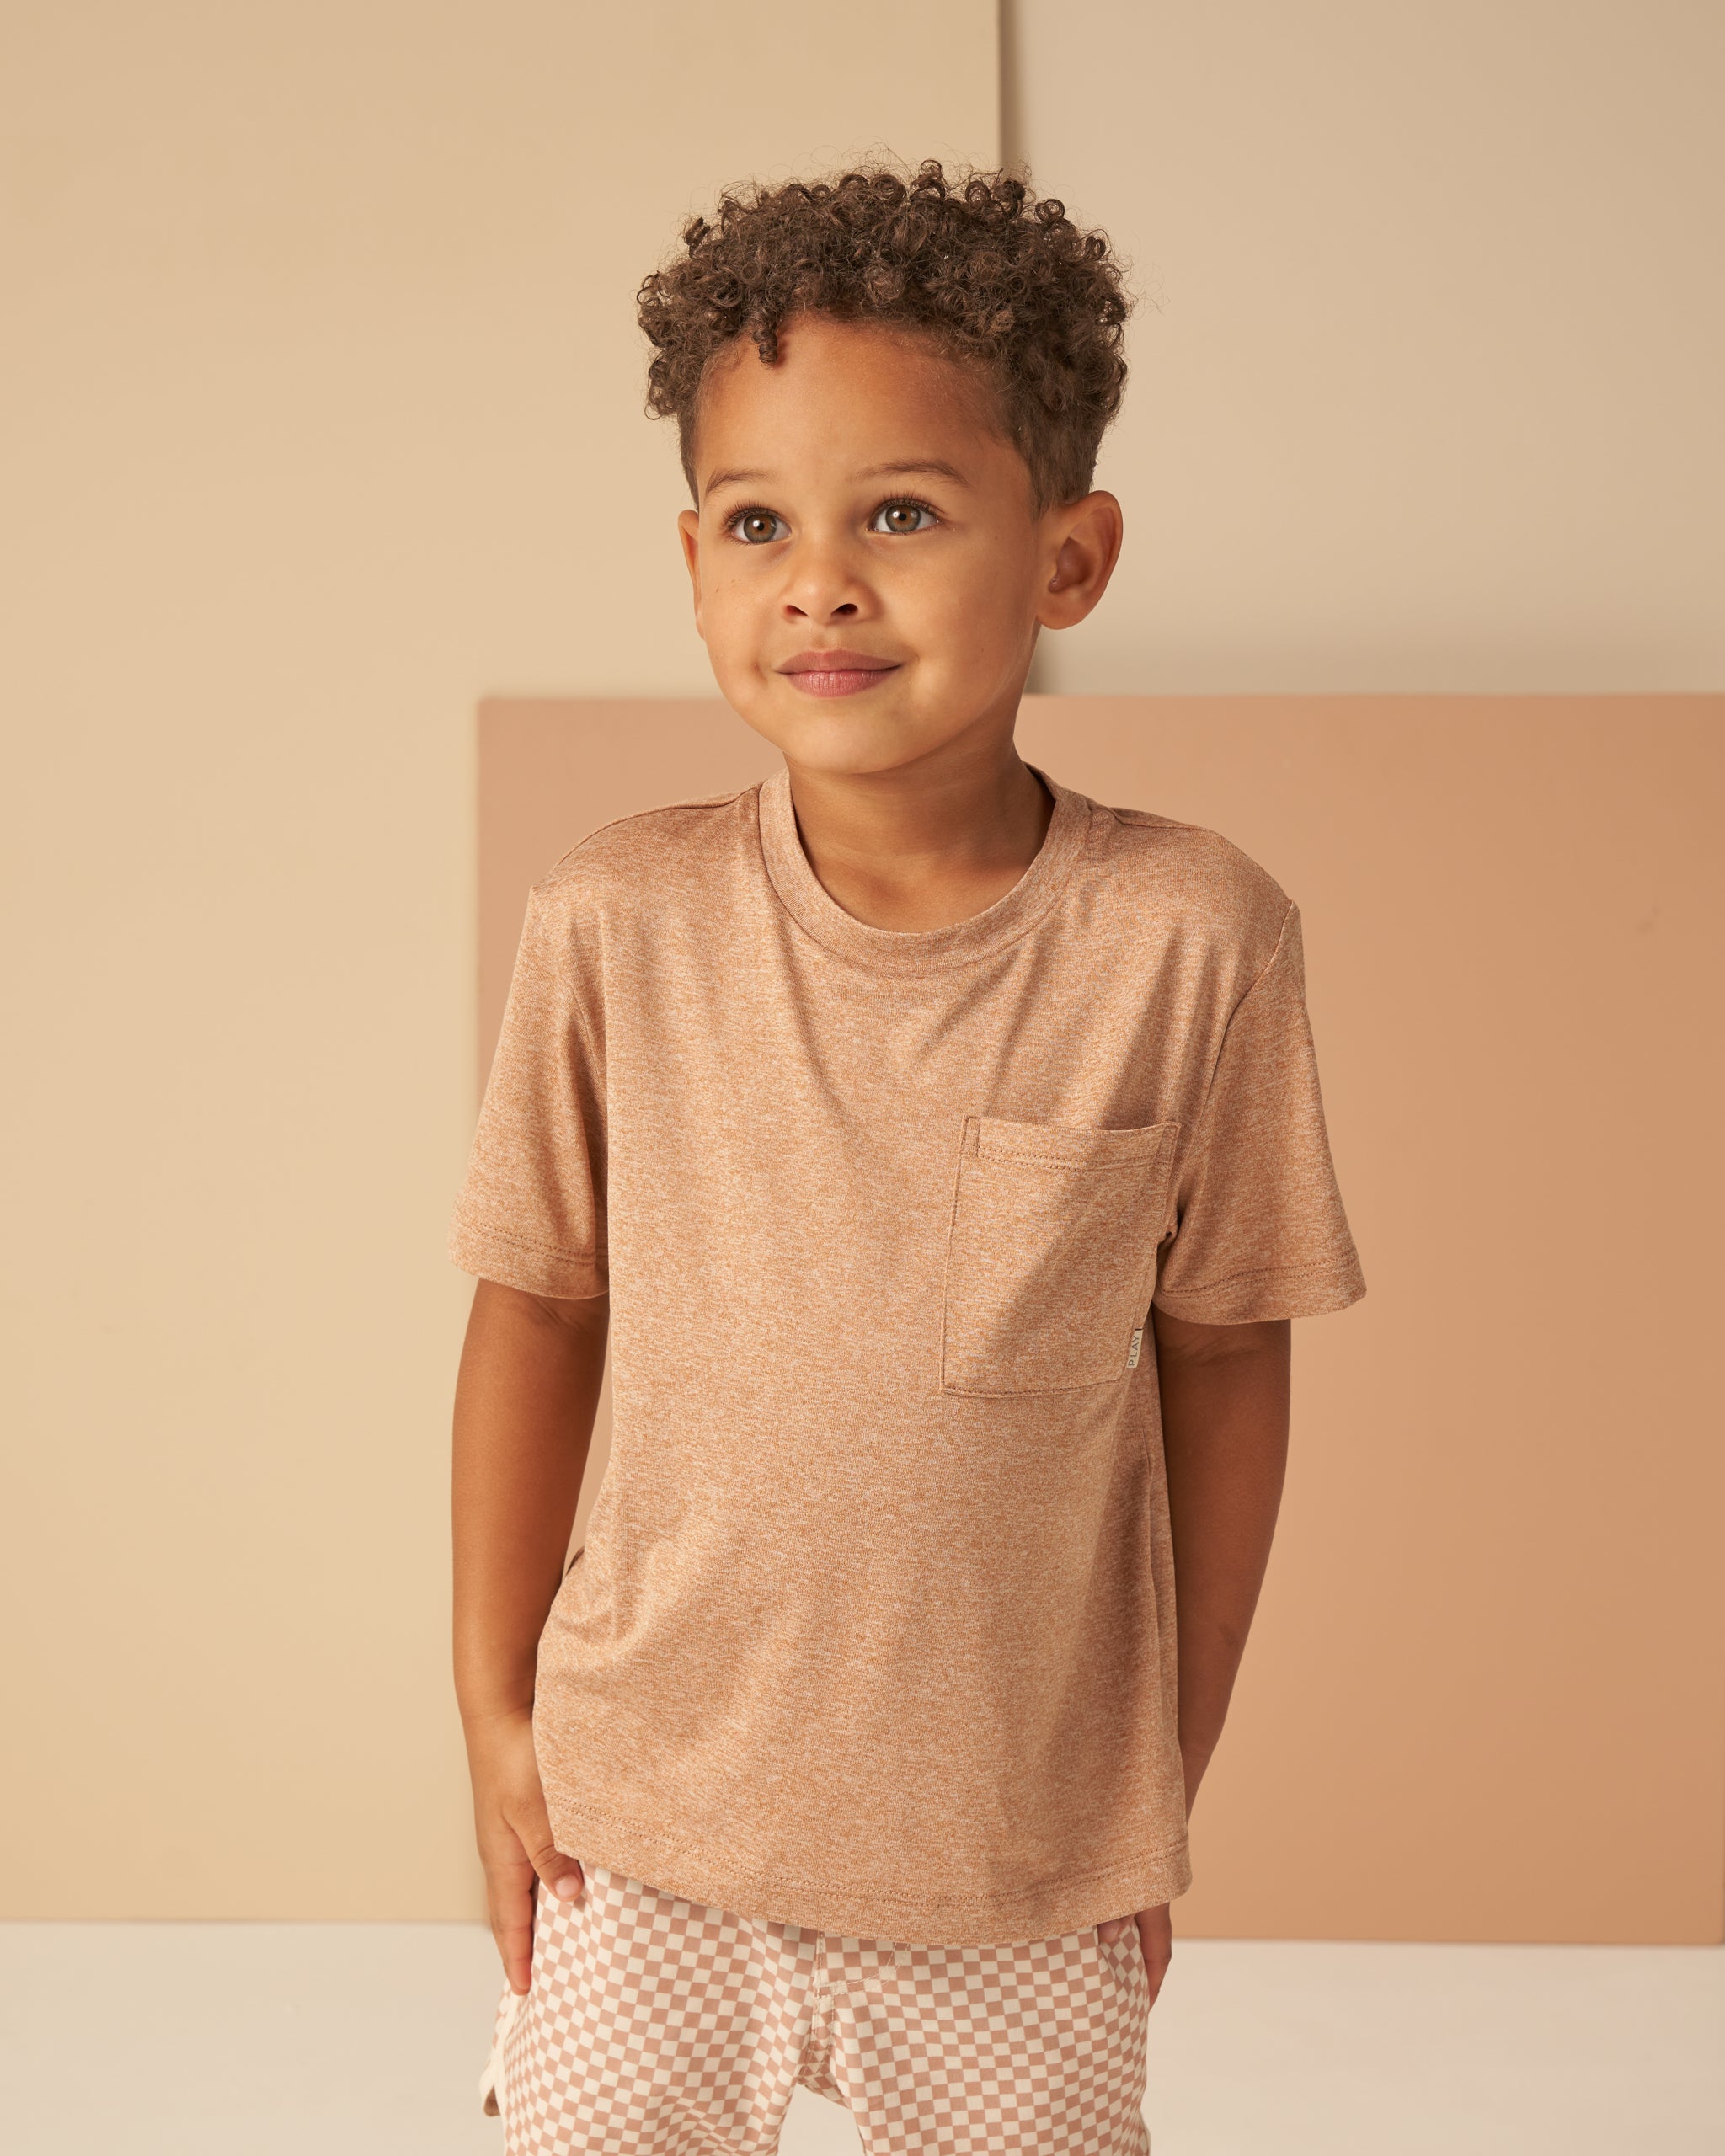 Cove Essential Pocket Tee || Heathered Clay - Rylee + Cru | Kids Clothes | Trendy Baby Clothes | Modern Infant Outfits |